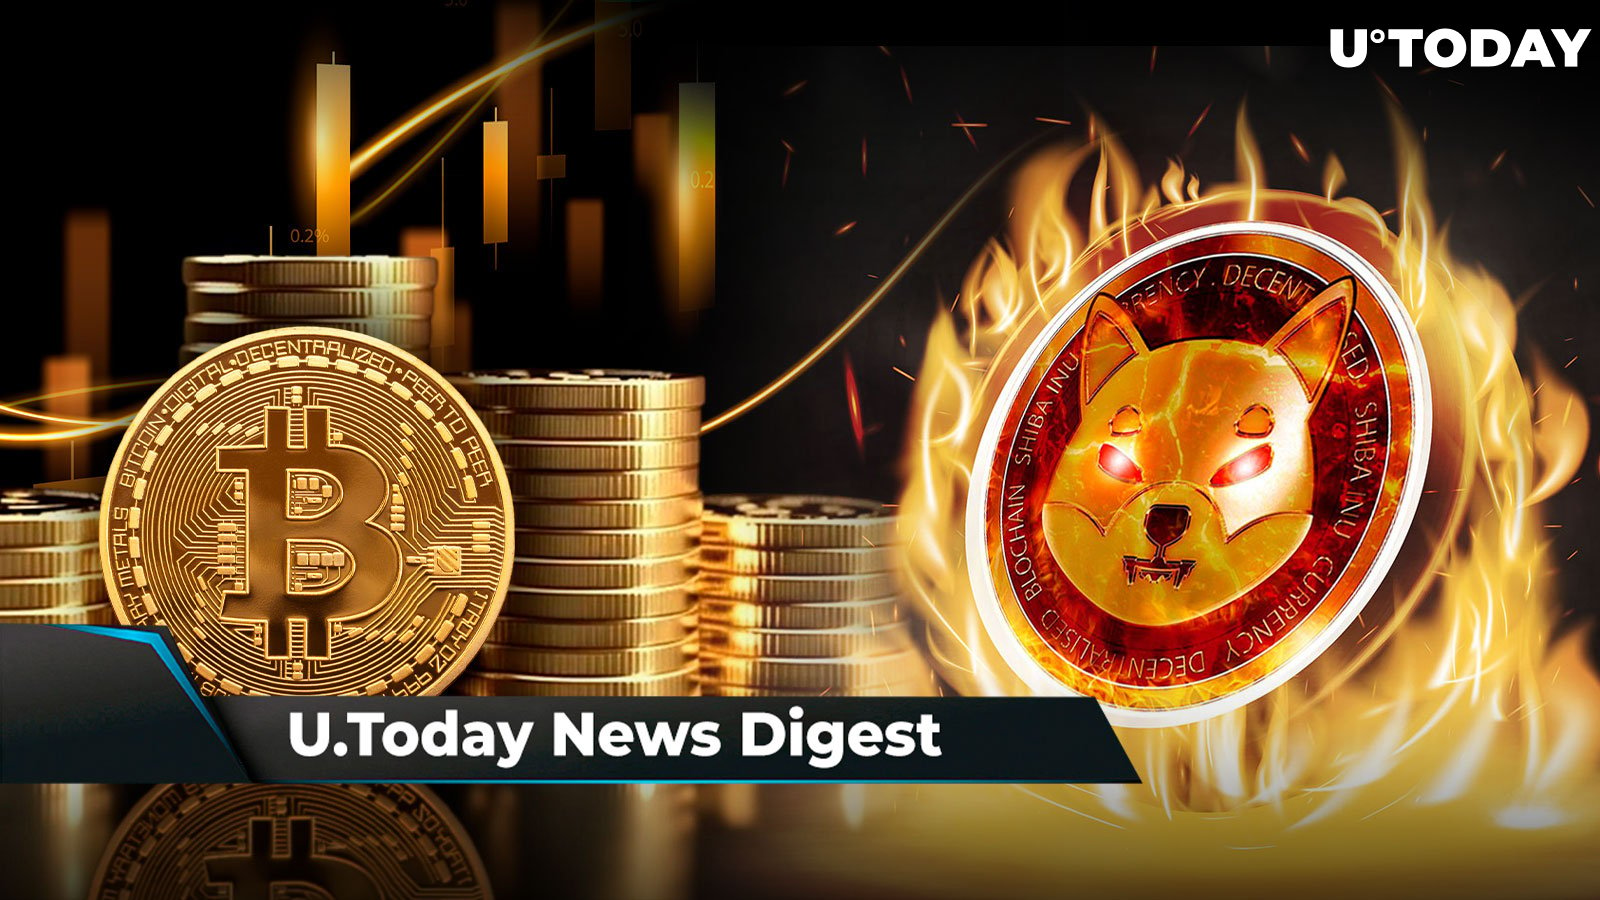 Here's Catalyst for BTC's Potential 6,000% Rise, 9.25 Trillion SHIB May Be Burned This Month, $1.19 Million Sent to Satoshi BTC Wallet in Mysterious Transfer: Crypto News Digest by U.Today